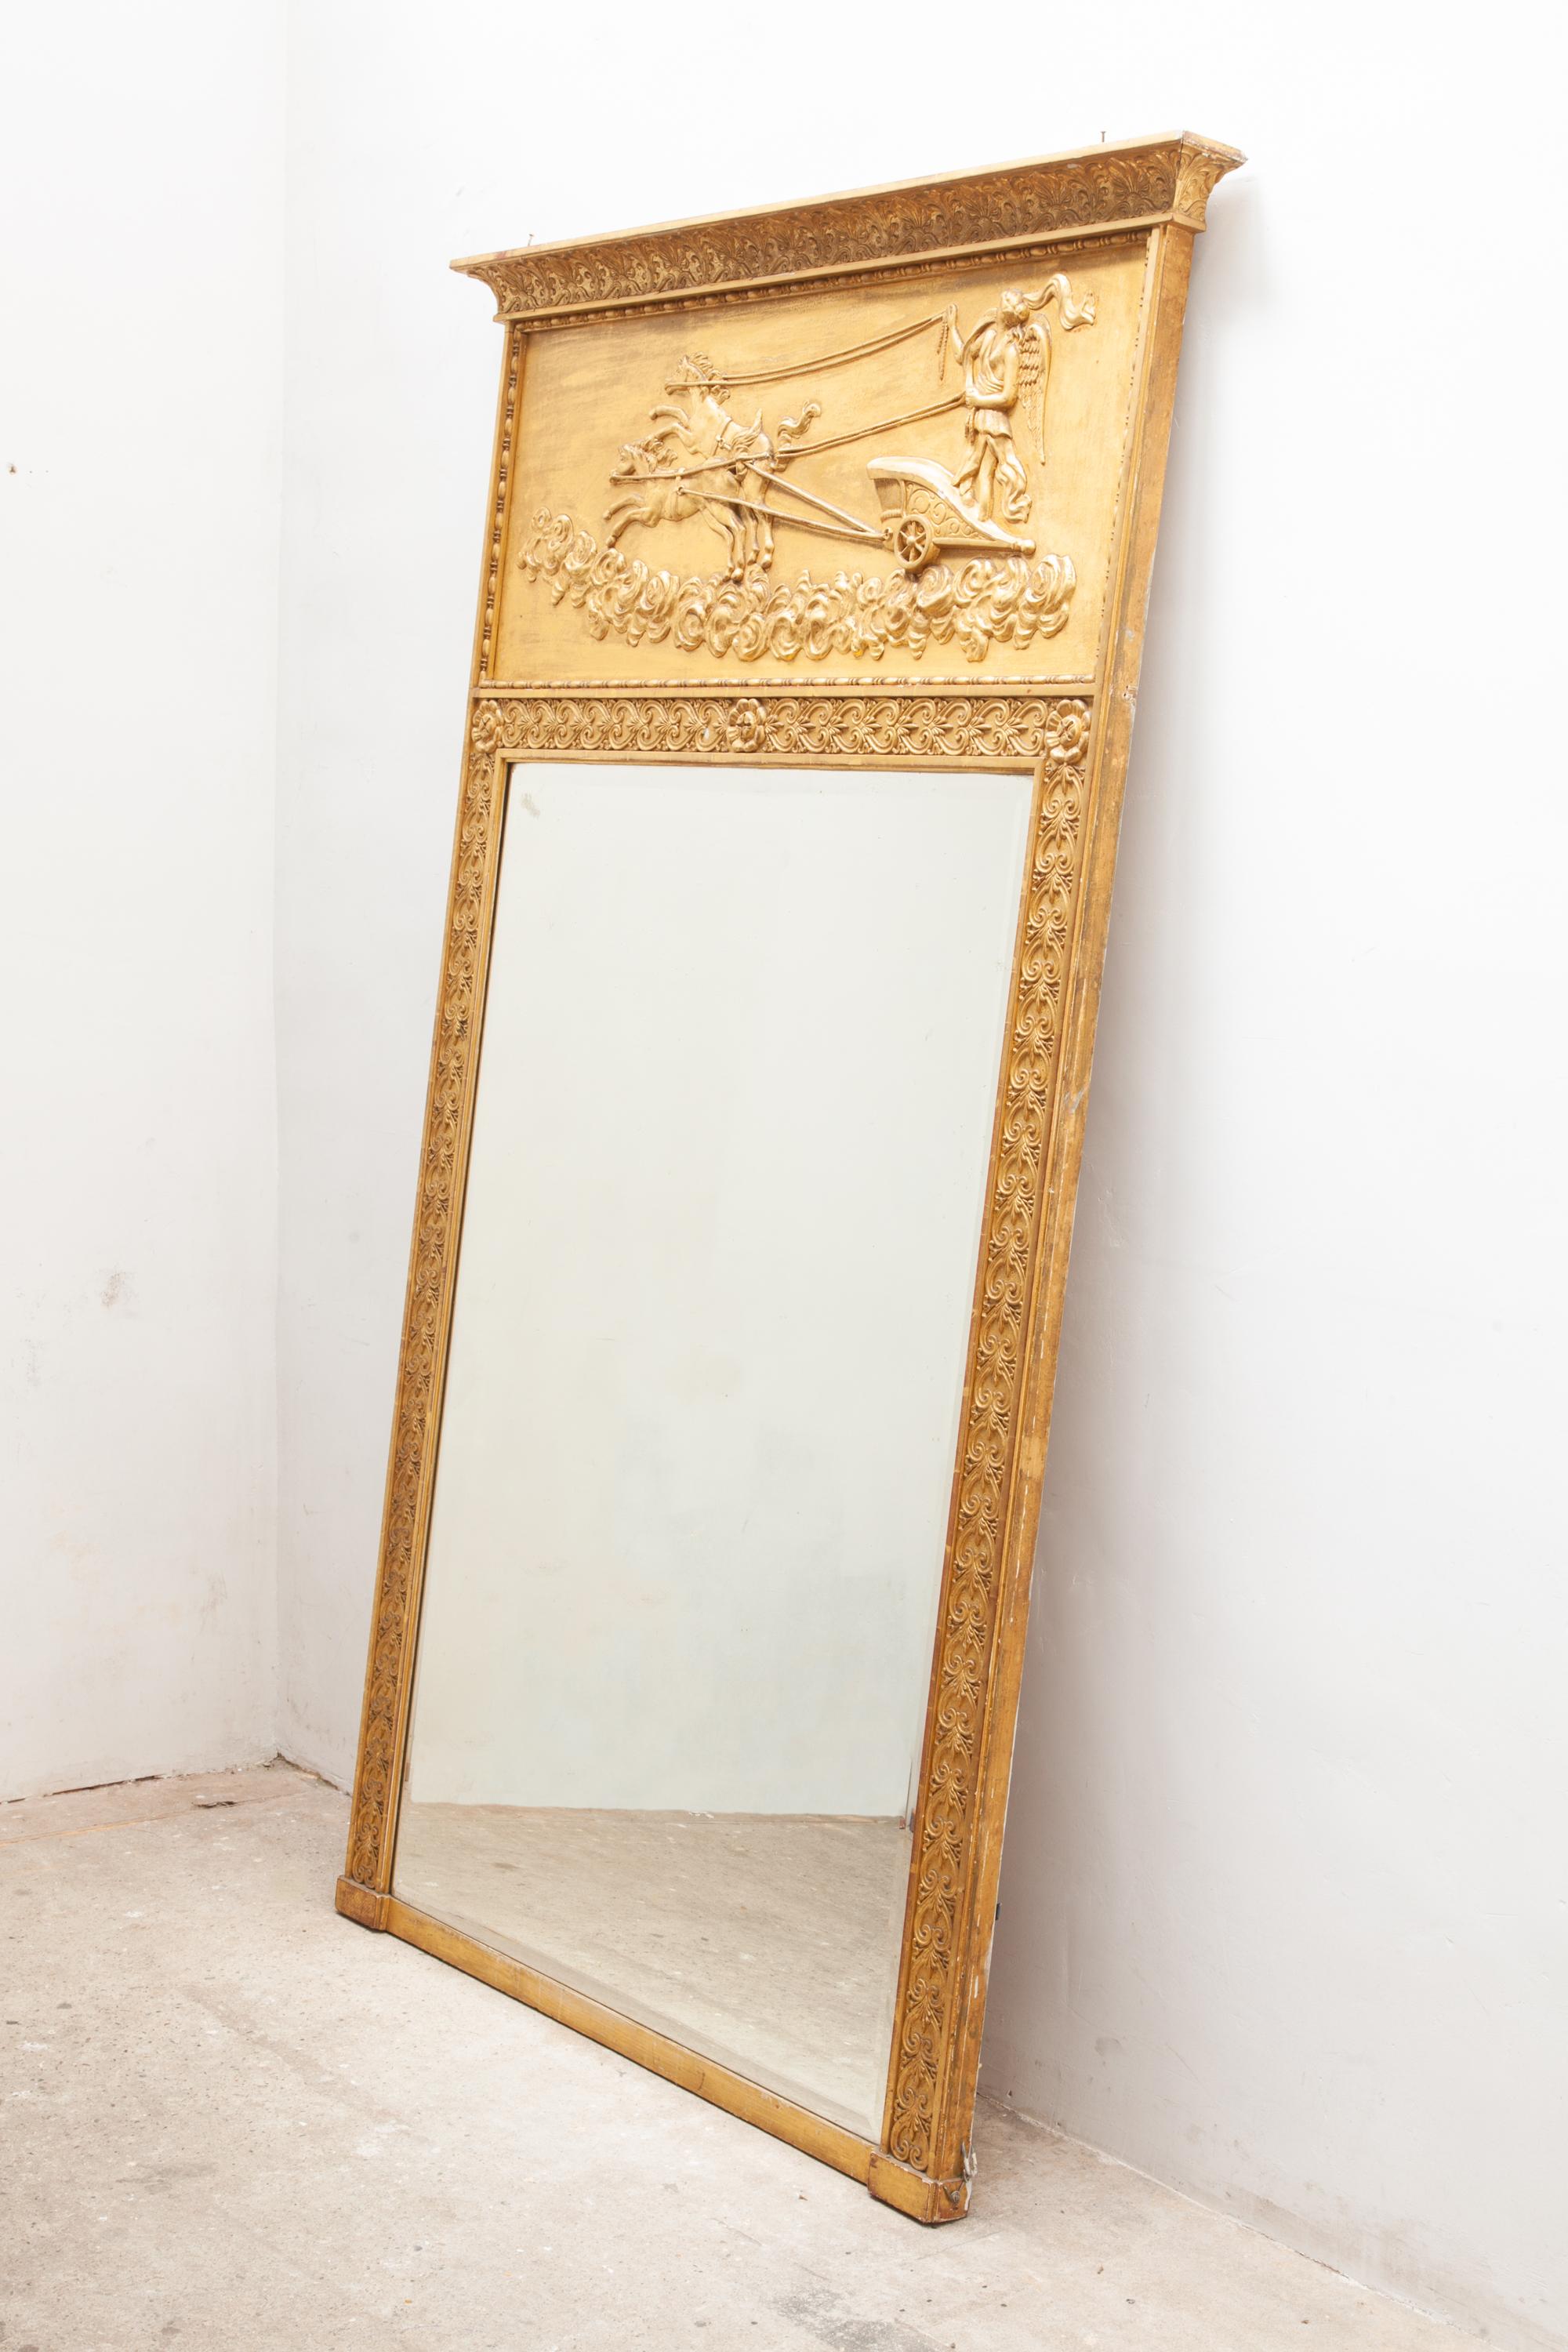 Victorian giltwood overmantel mirror with a frieze with applied classical decoration the godess Eos and her horses bringing the day and sunshine,having original bevelled edge mirror in finely carved ornament gilt frame,circa 1870.

This elegantly